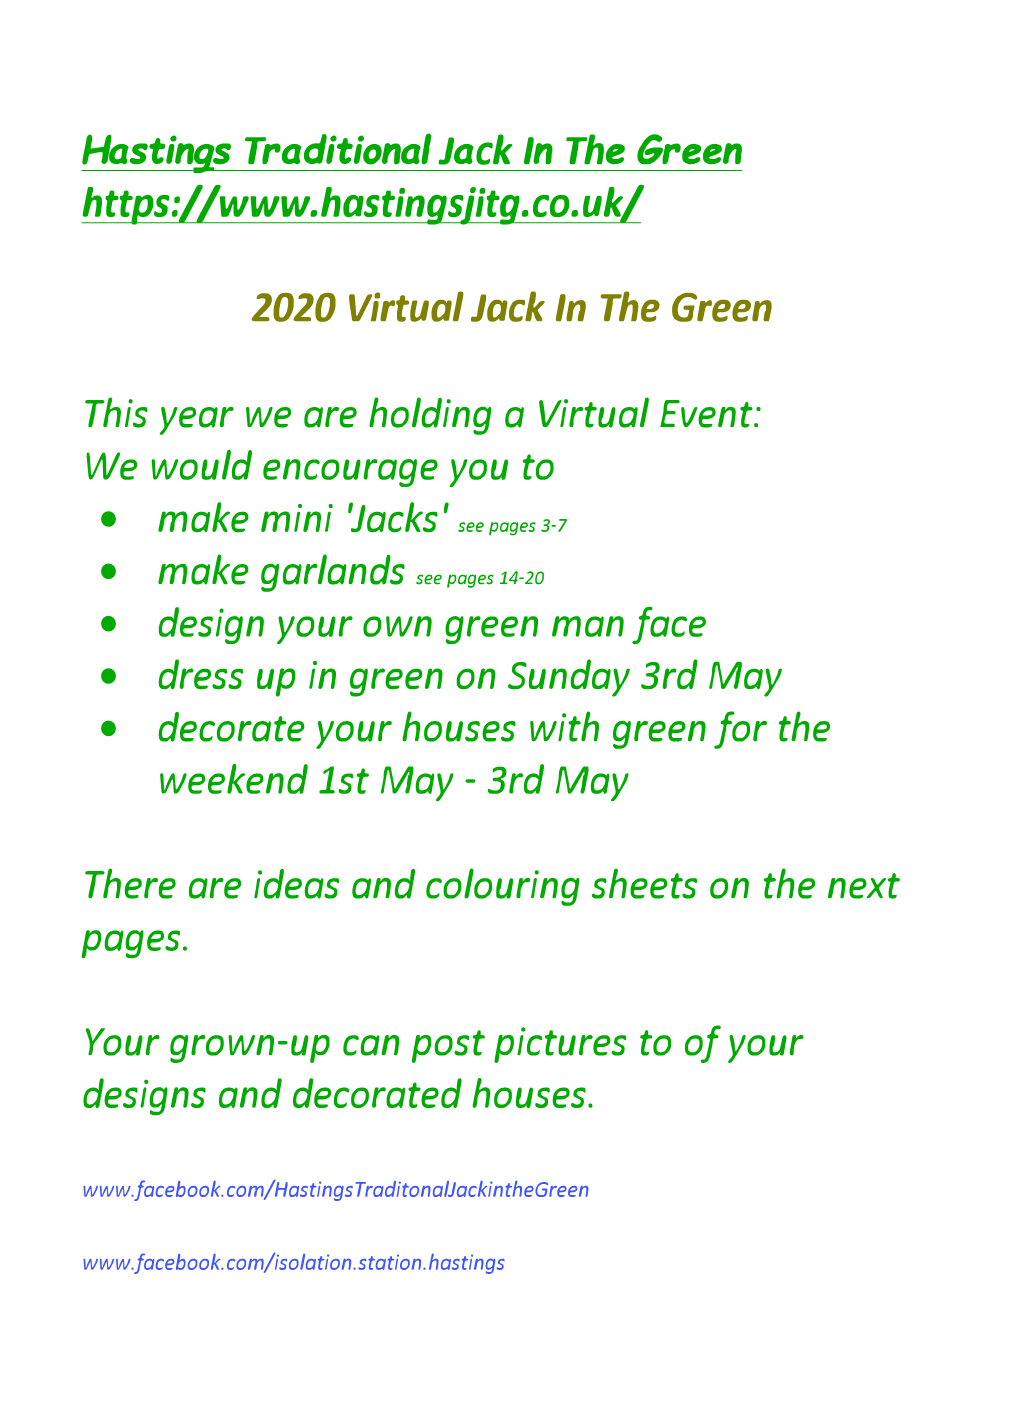 Hastings Traditional Jack in the Green